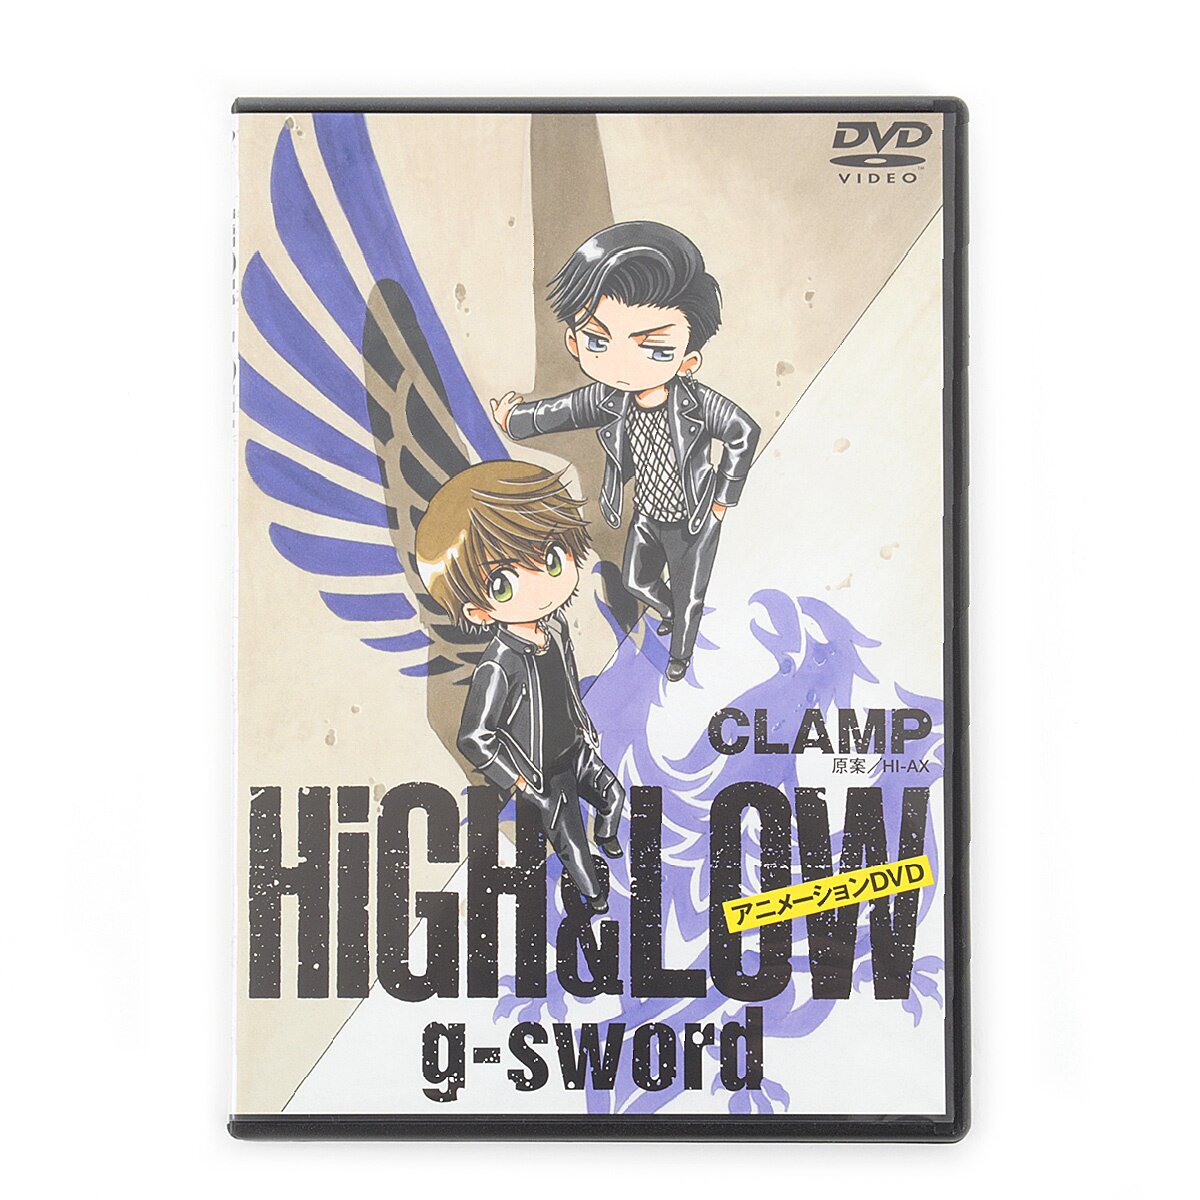 High & Low: G-Sword Special Edition w/ DVD